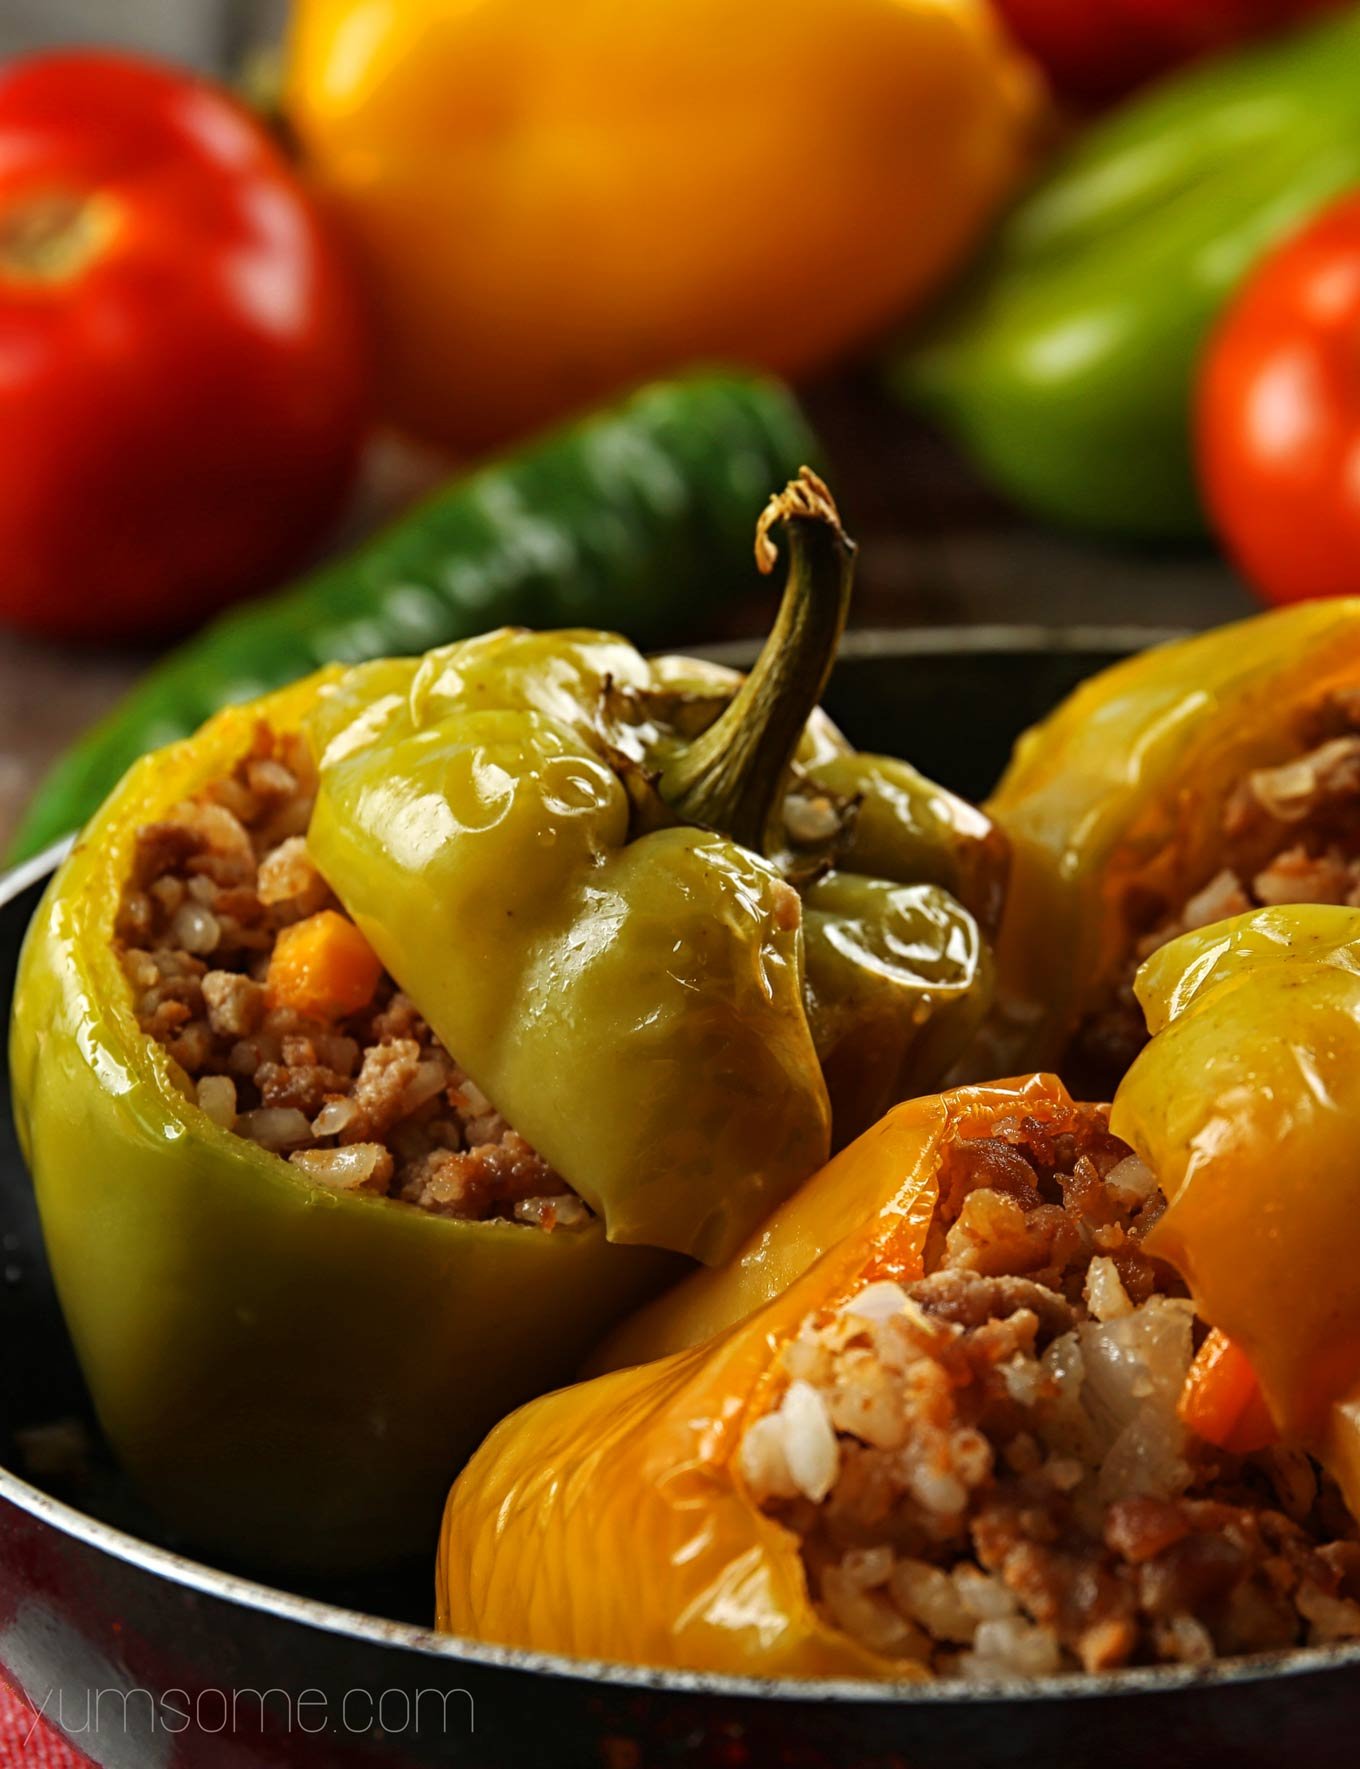 Several stuffed peppers in a stockpot.